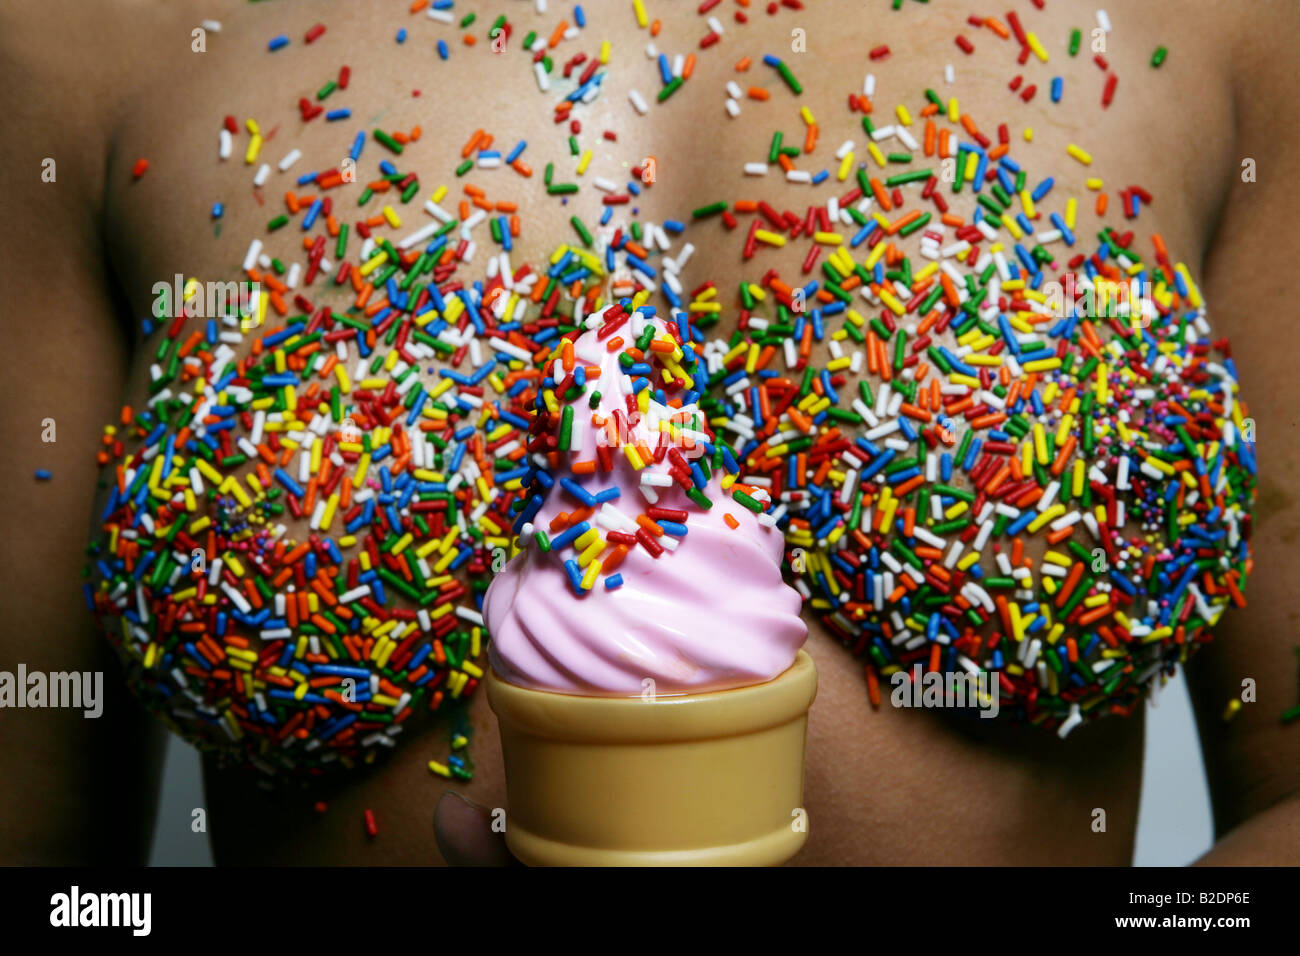 https://c8.alamy.com/comp/B2DP6E/womans-sprinkled-breasts-with-ice-cream-cone-B2DP6E.jpg